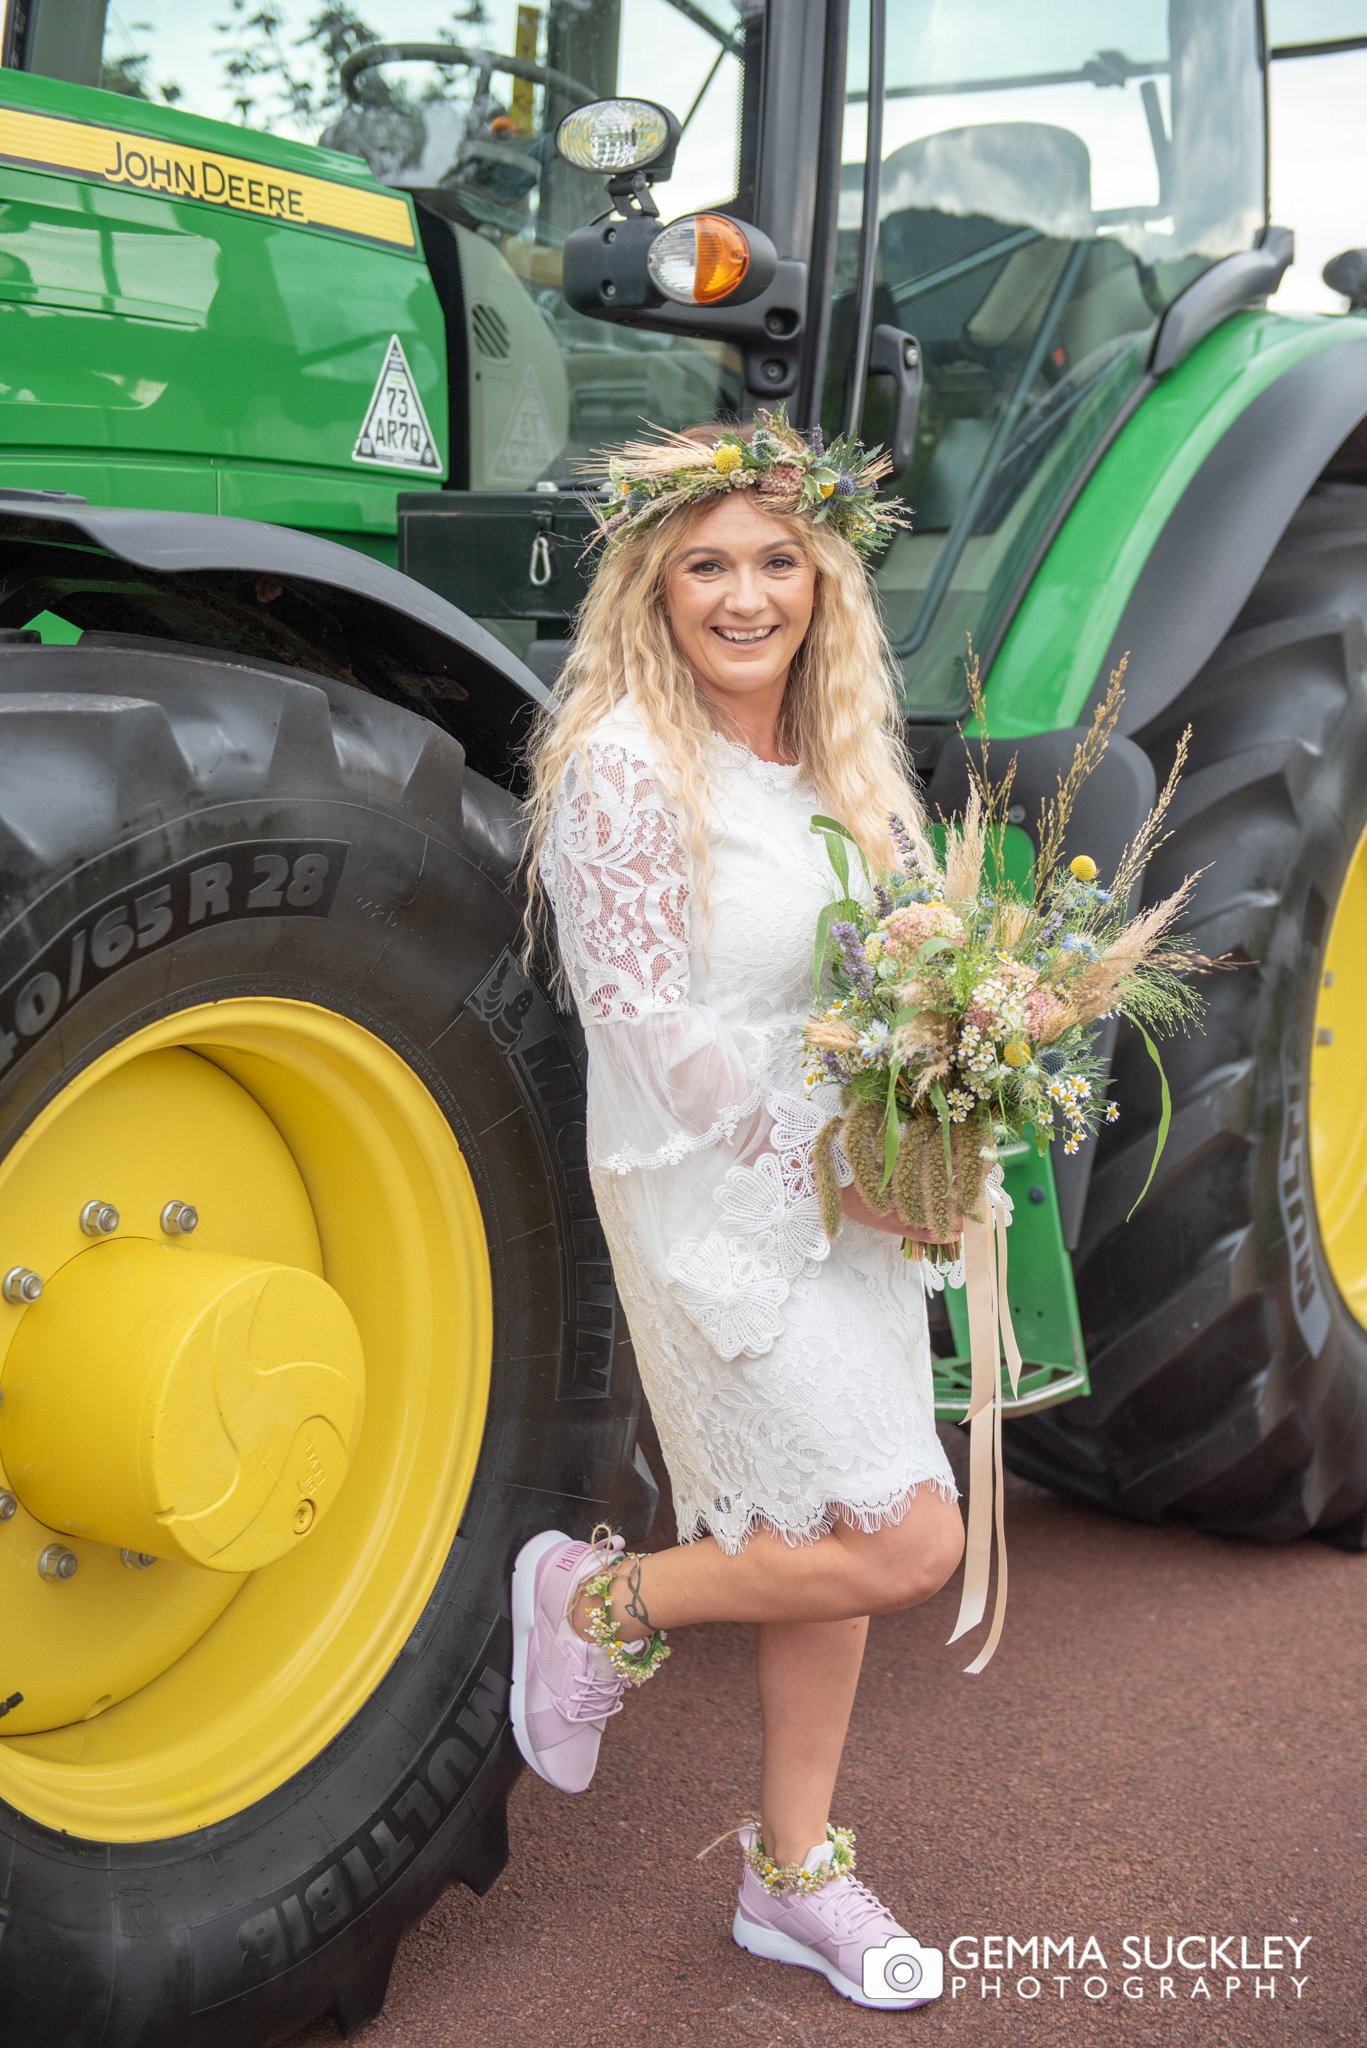 the bride laughing at the camera infront of the tractor